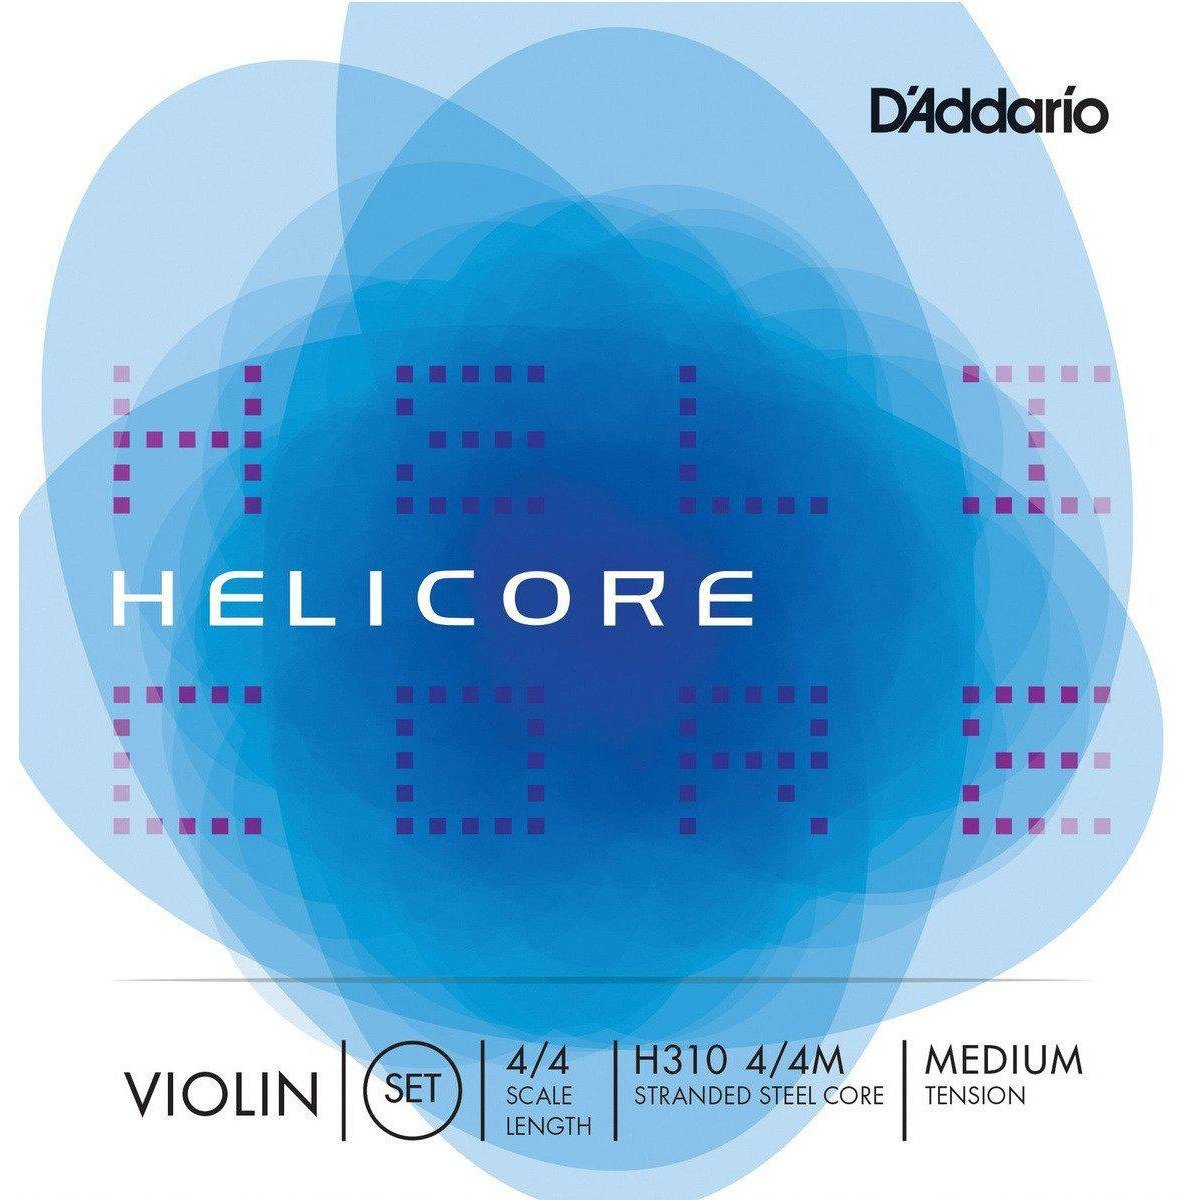 D'Addario Helicore Violin String Set, 4/4 Scale, Medium Tension-Andy's Music